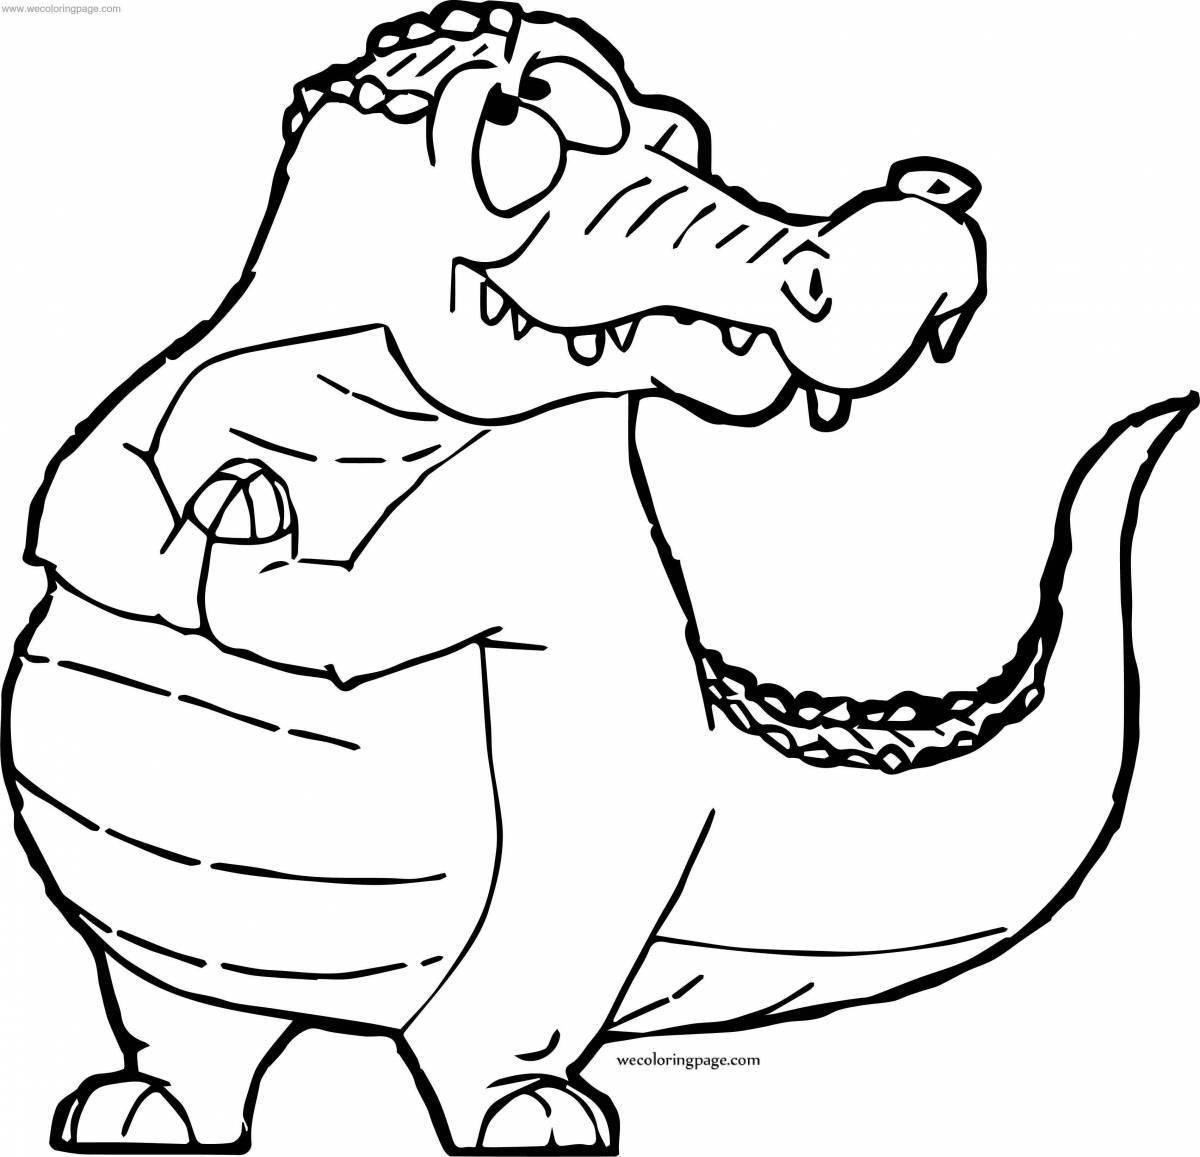 Monty the happy alligator coloring page